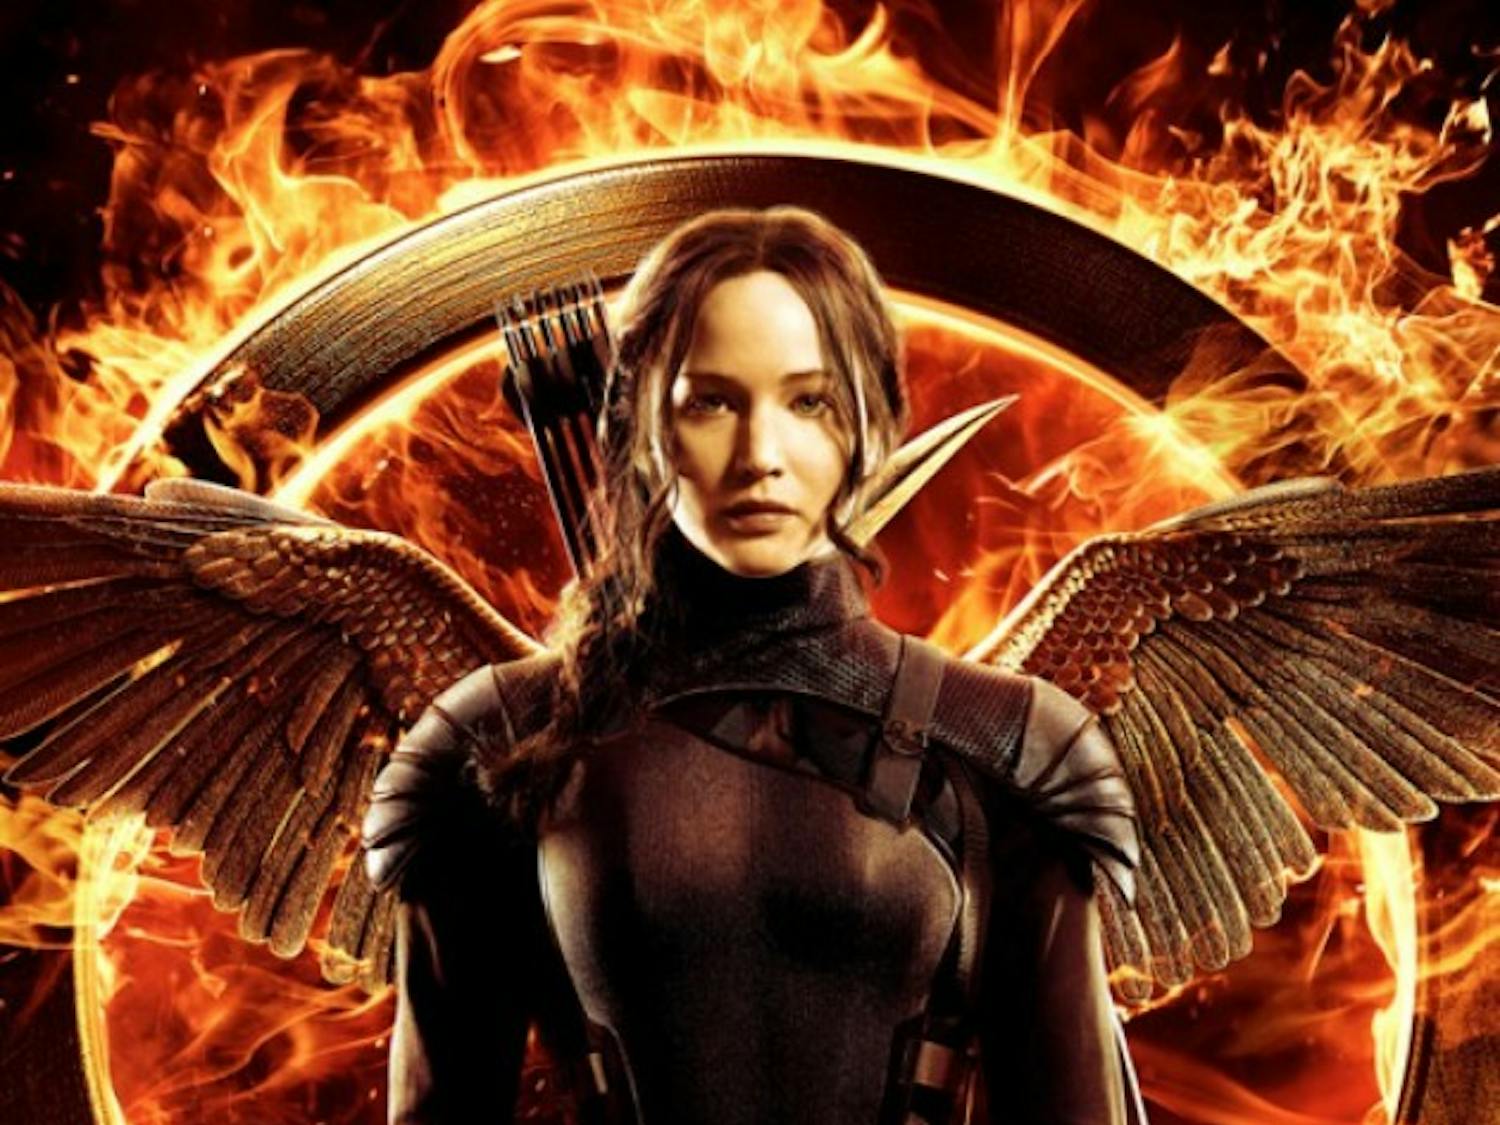 Suzanne Collins&rsquo; &ldquo;The Hunger Games&rdquo; has become
a global phenomenon, attracting million of
viewers to the theater for each film. The two part
conclusion to the series, promises an emotional
and action packed conclusion to the trilogy.
Courtesy of Lionsgate Films